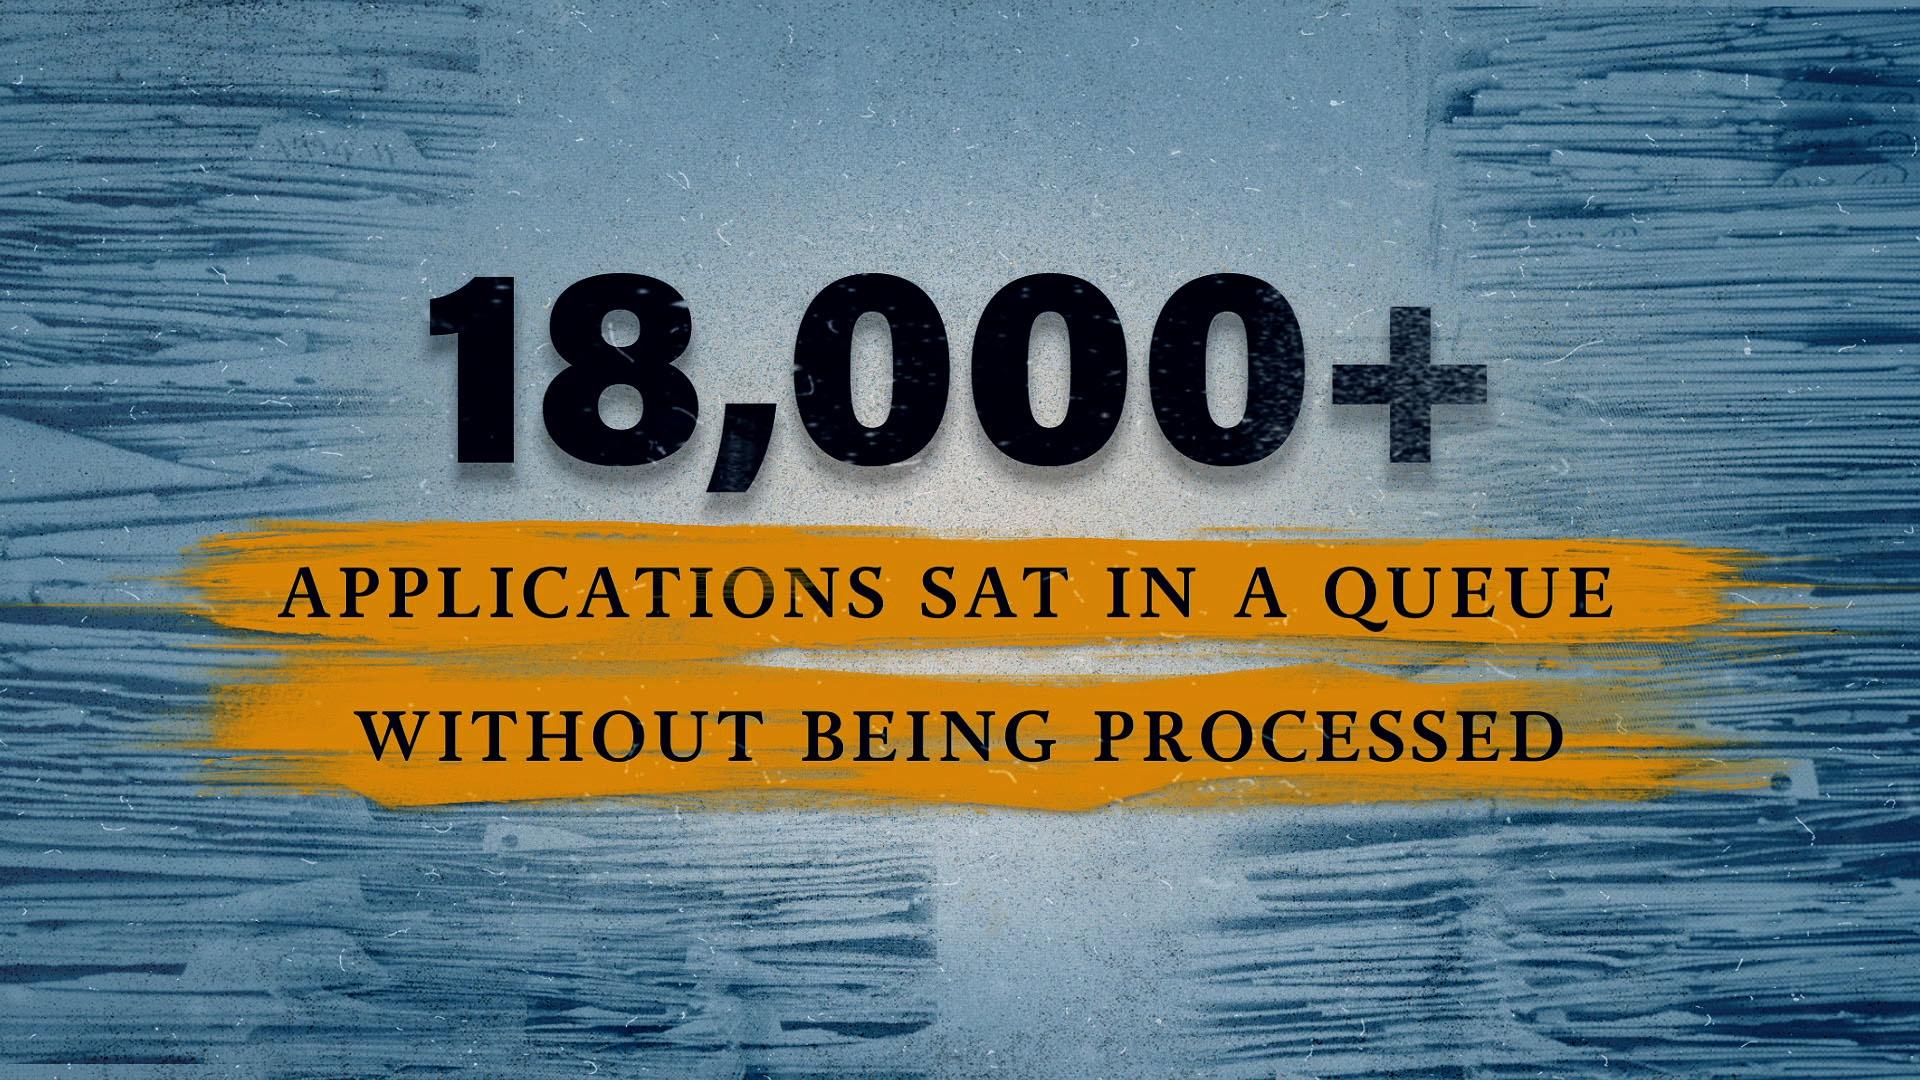 Over 18,000 applications for Iraq and Afghanistan veteran care remain unprocessed.